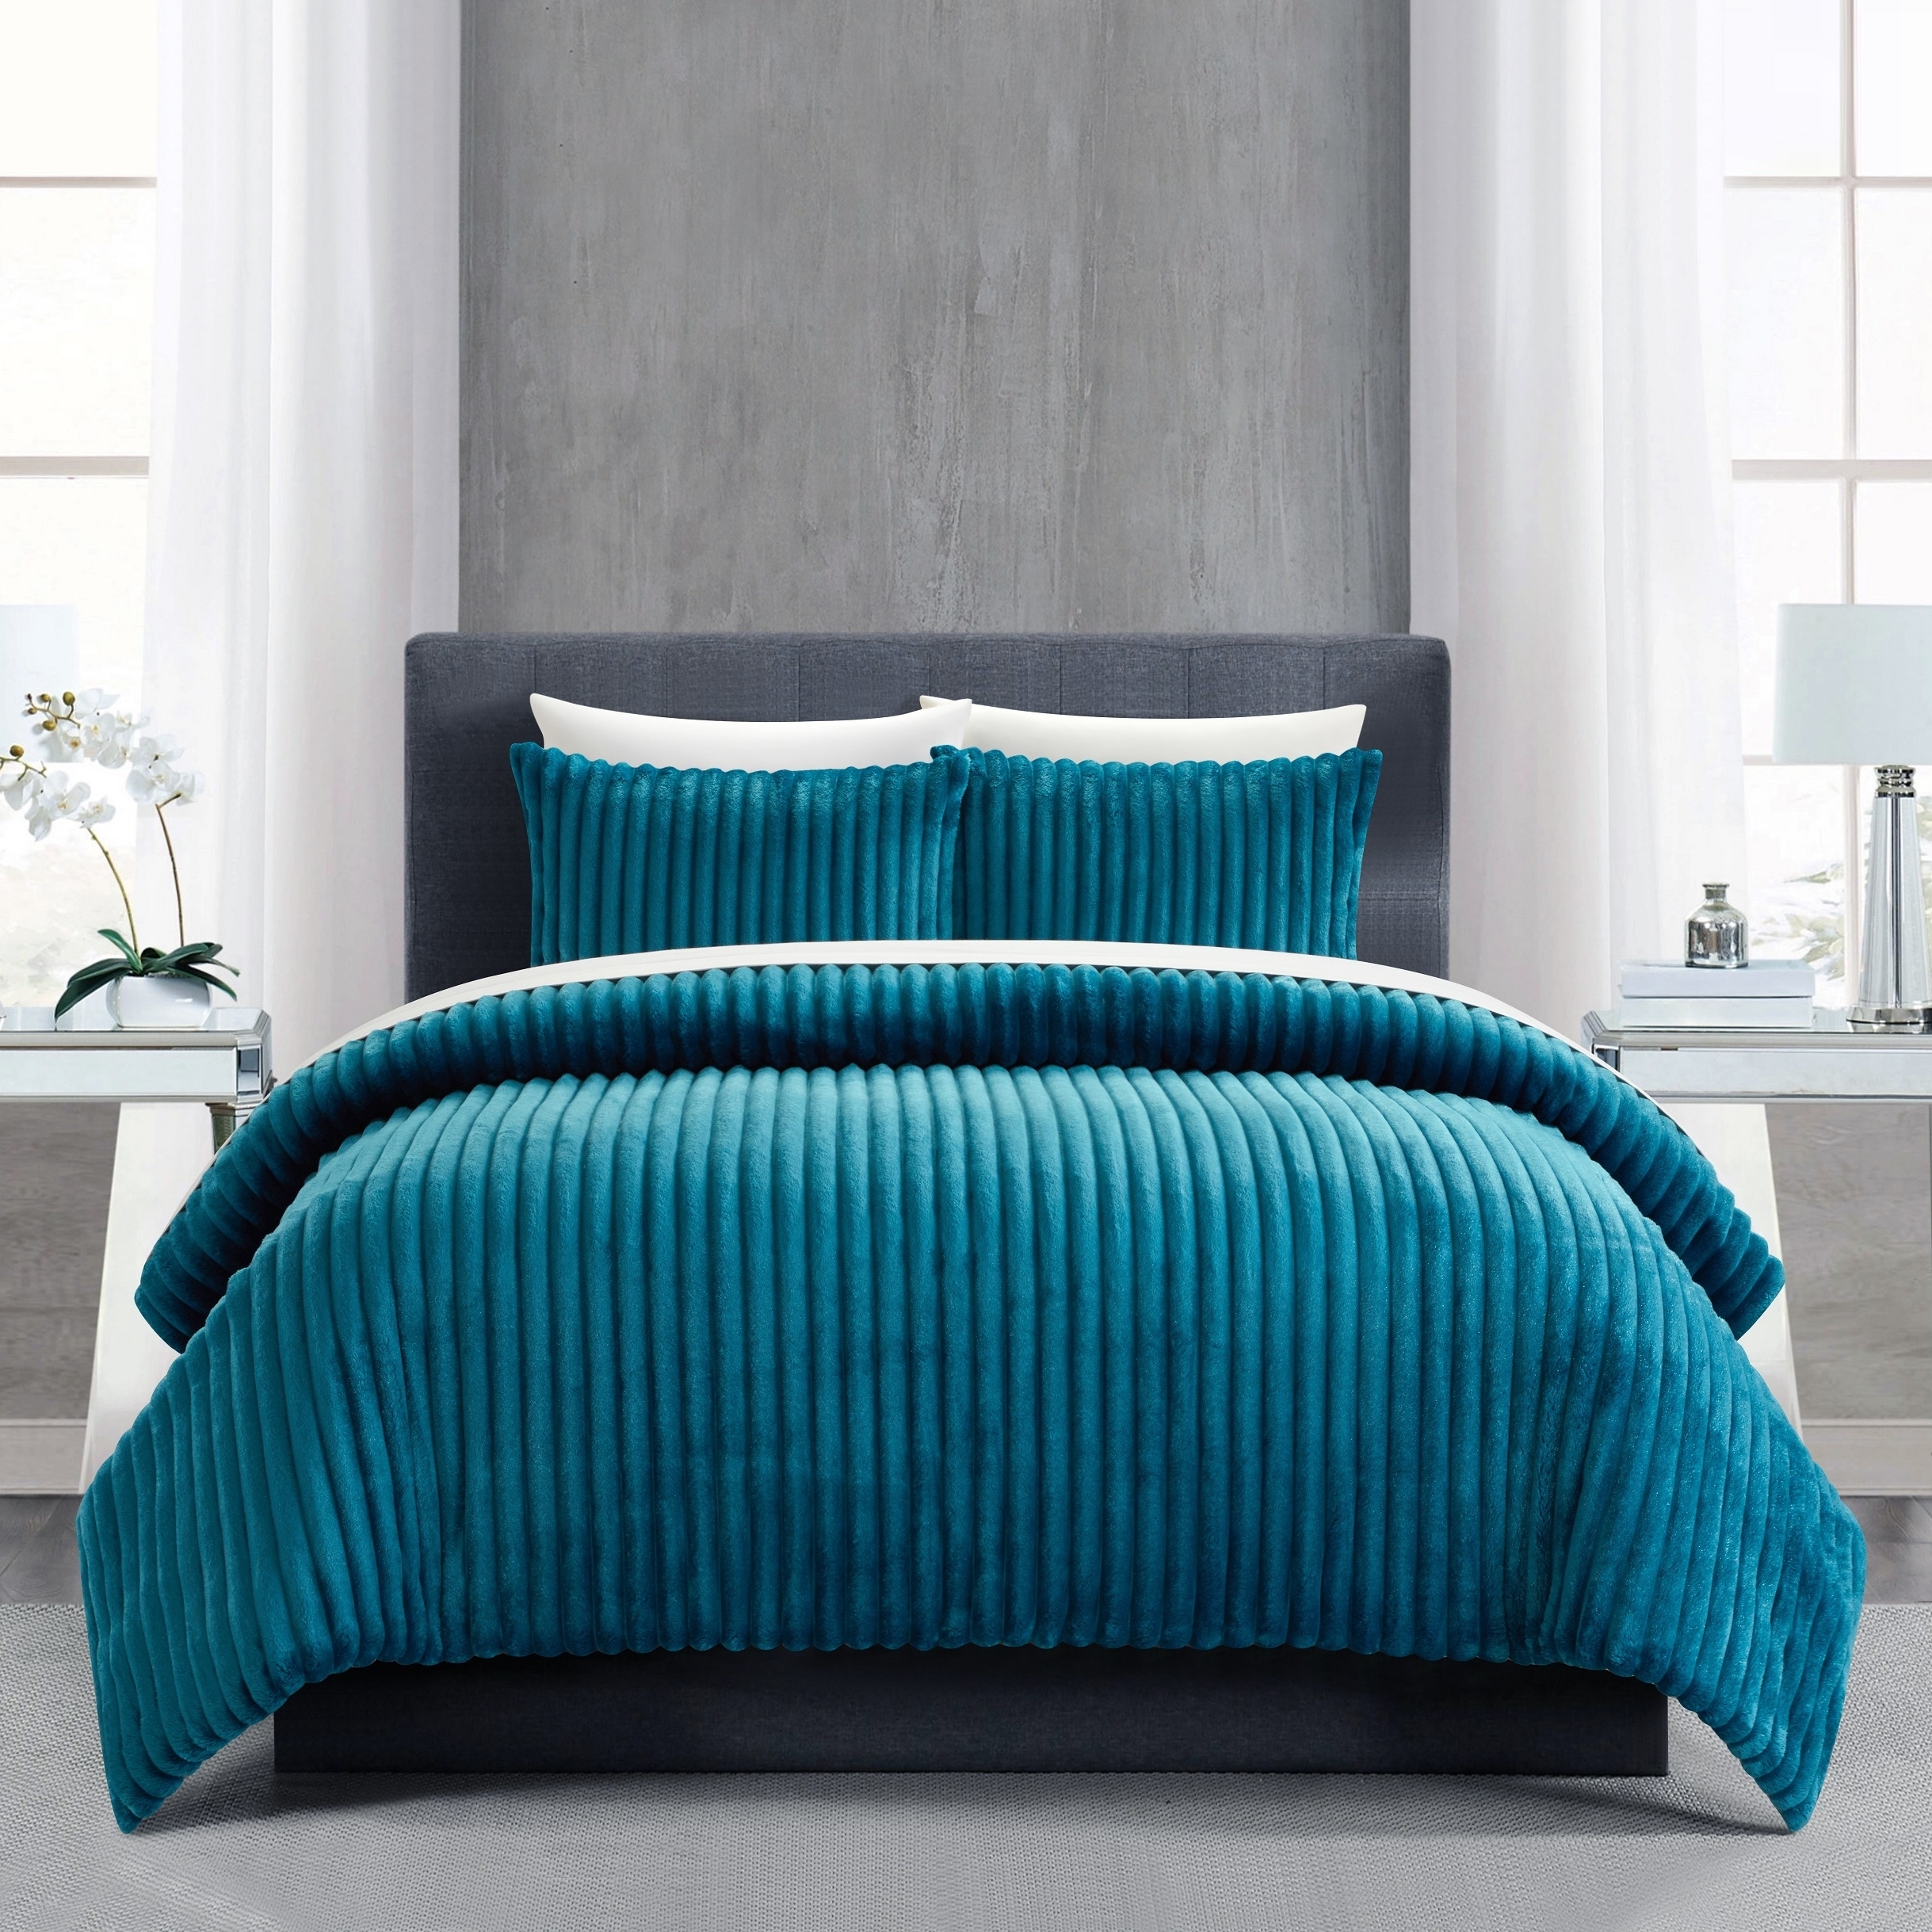 Pabrico 3 Or 2 Piece Comforter Set Microplush Channel Quilted - Teal, King - 3 Piece